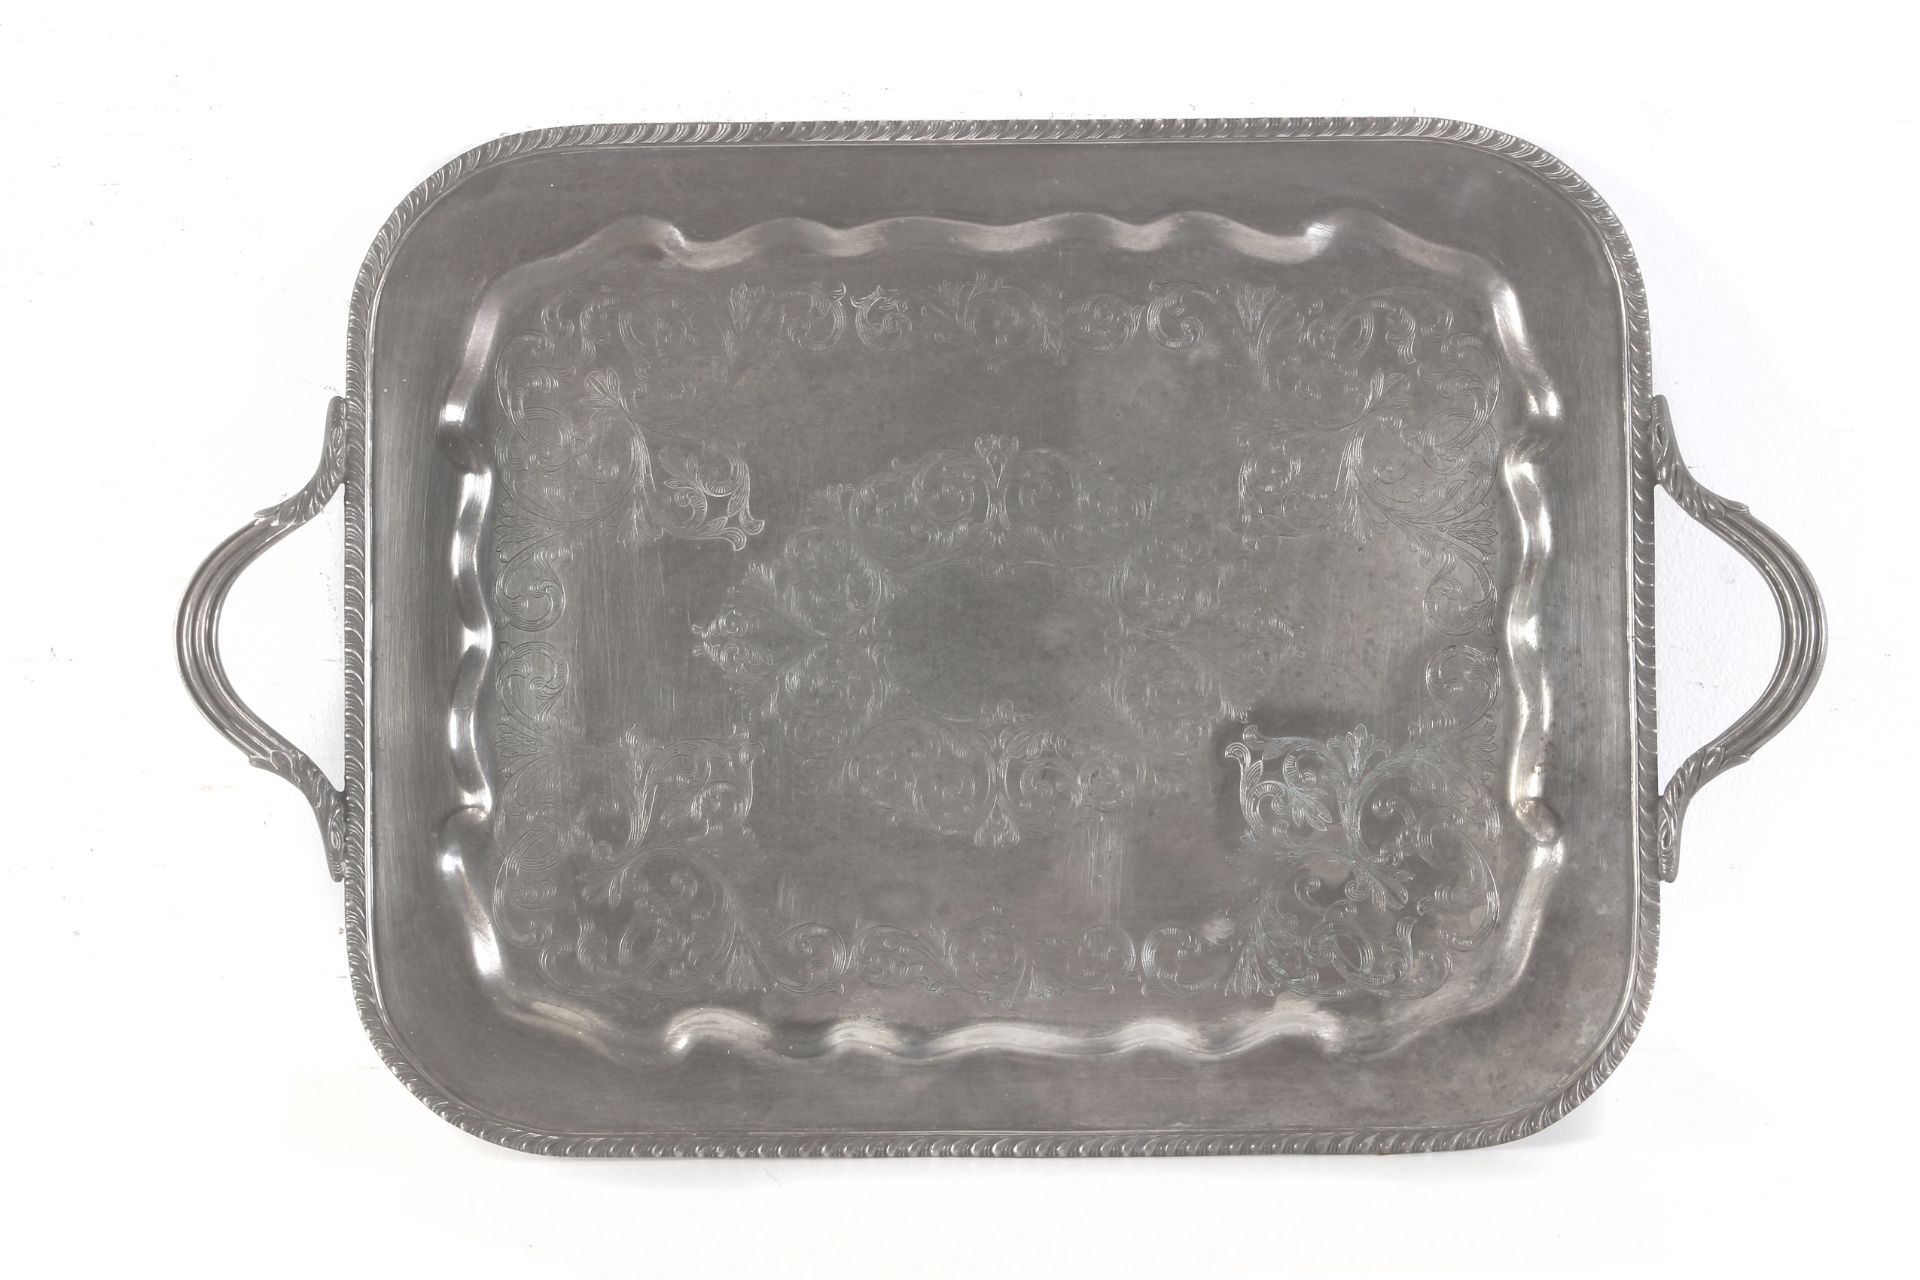 A 20th century English silver serving tray